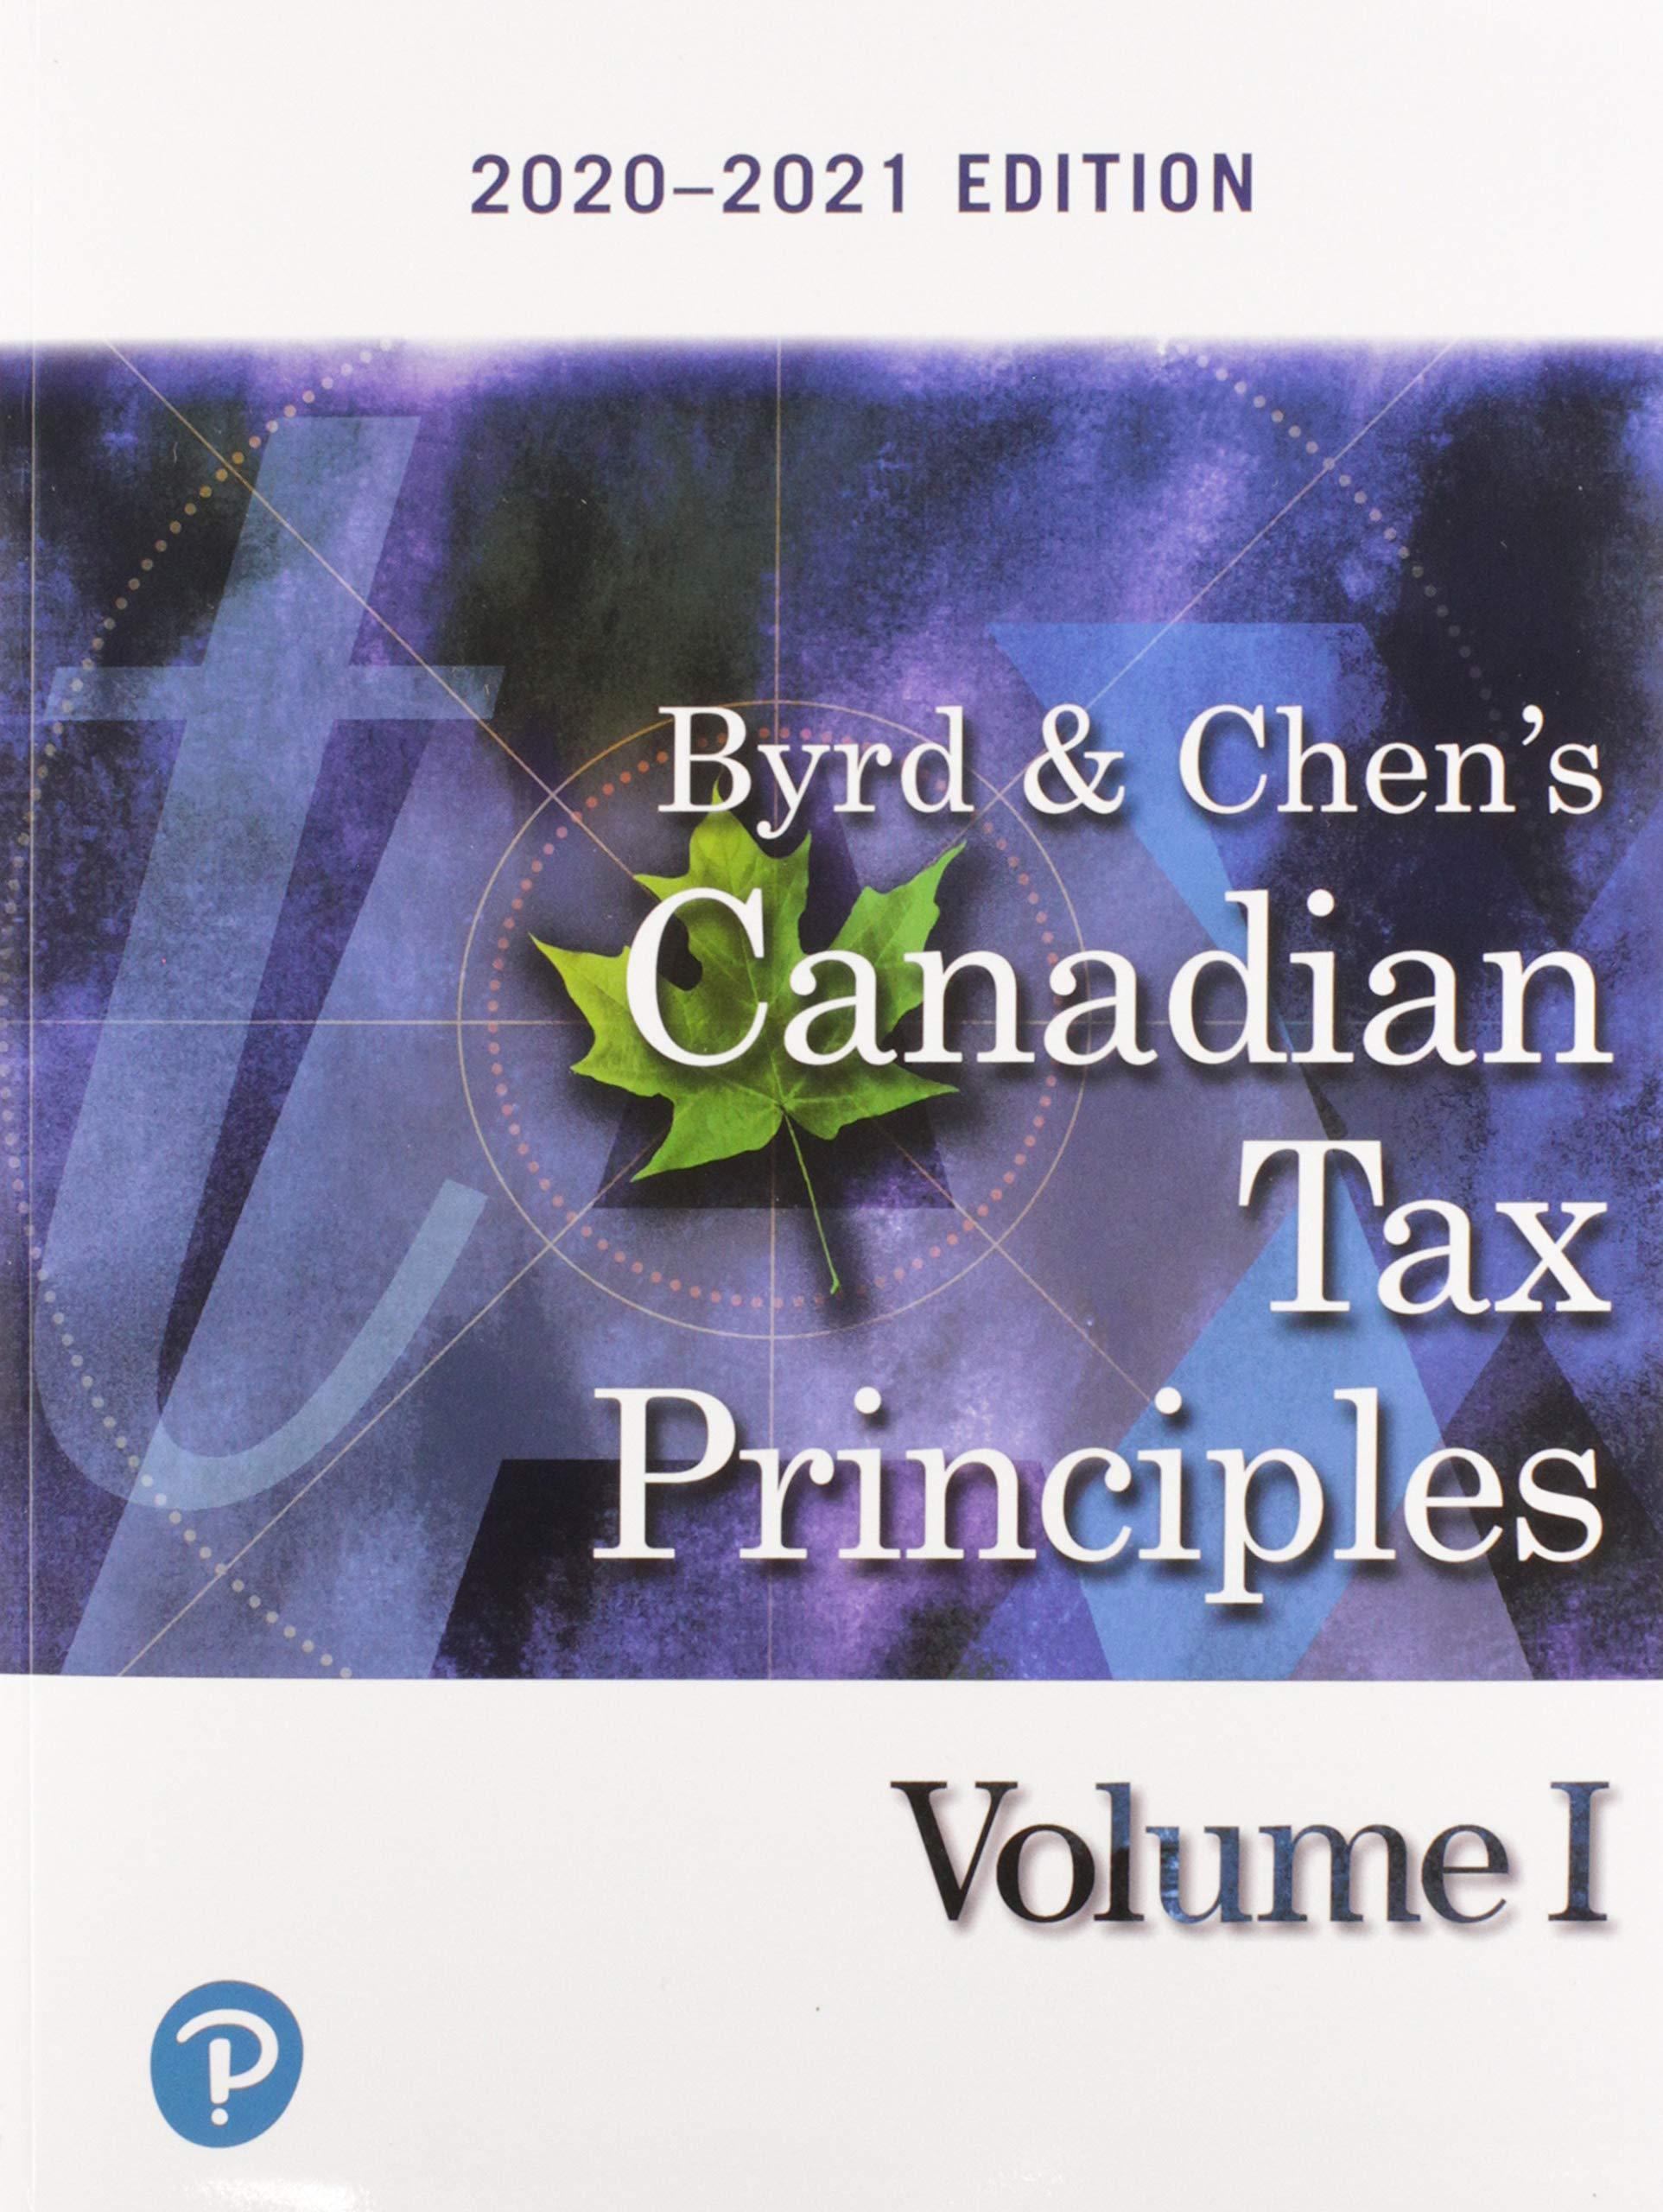 canadian tax principles volume 1 2020-2021 edition clarence byrd, ida chen 0136745105, 978-0136745105